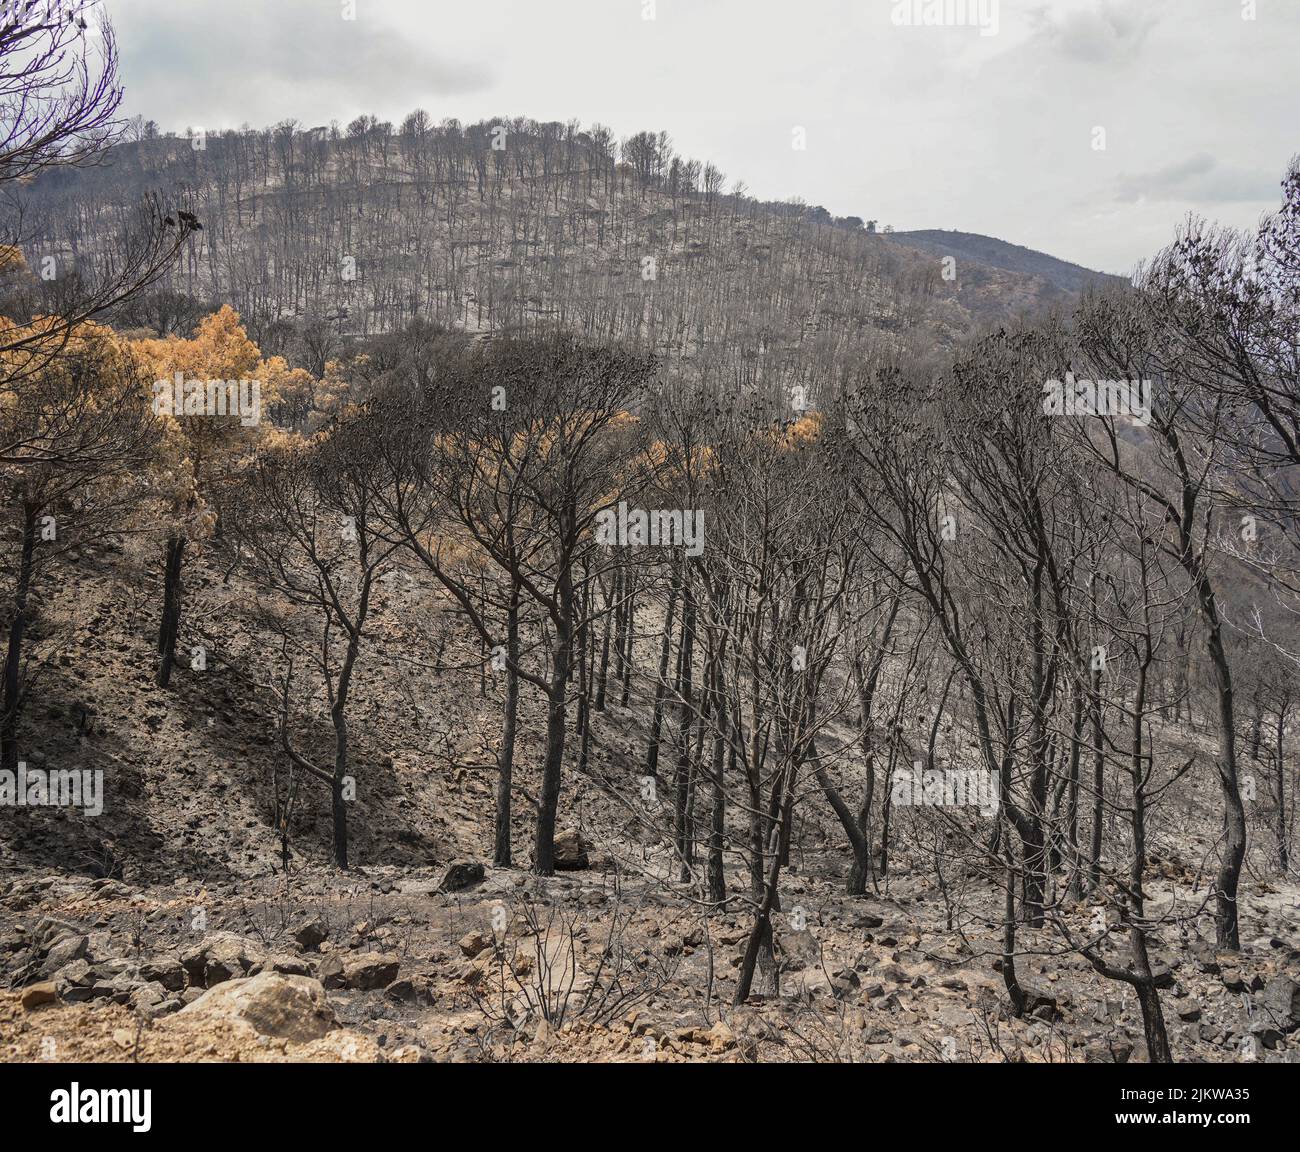 Spanish mountains with pine forest burned after wildfire, Mijas, Malaga, Andalucia, Spain Stock Photo